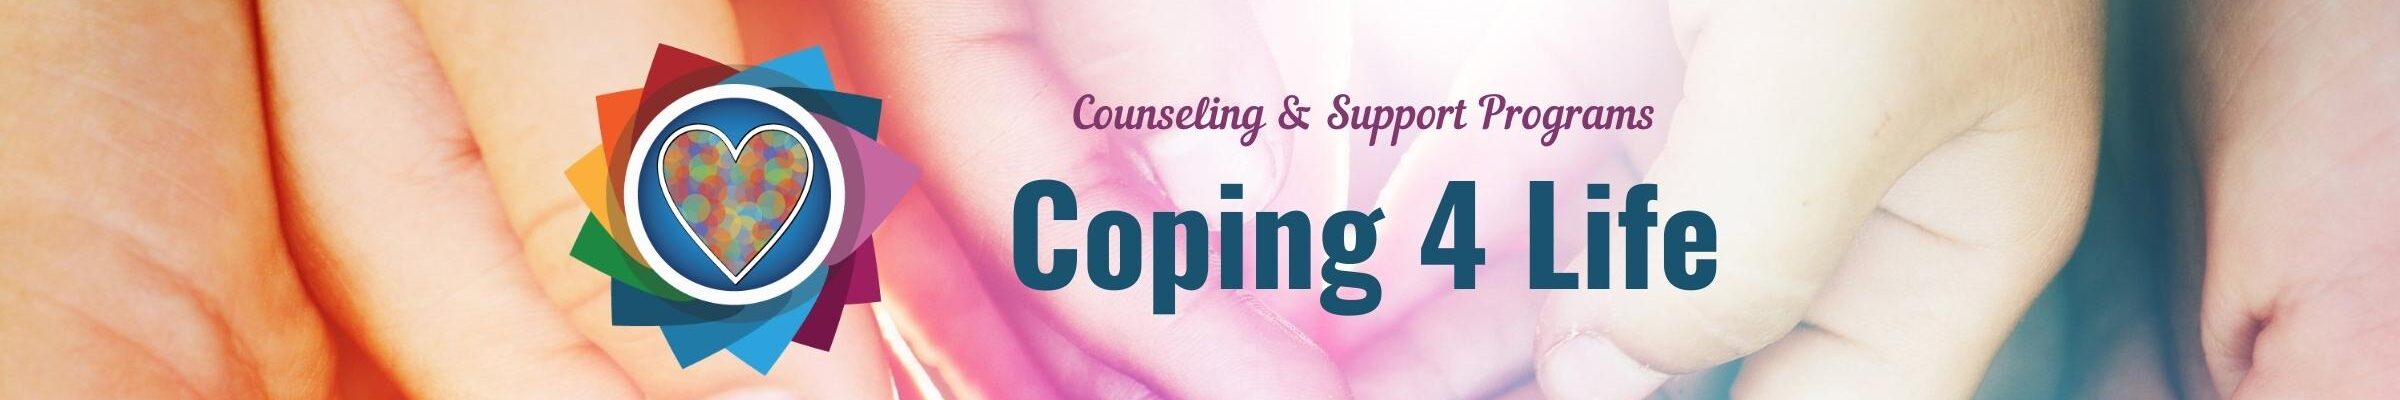 coping-4-life-banner-counseling-and-support-programs